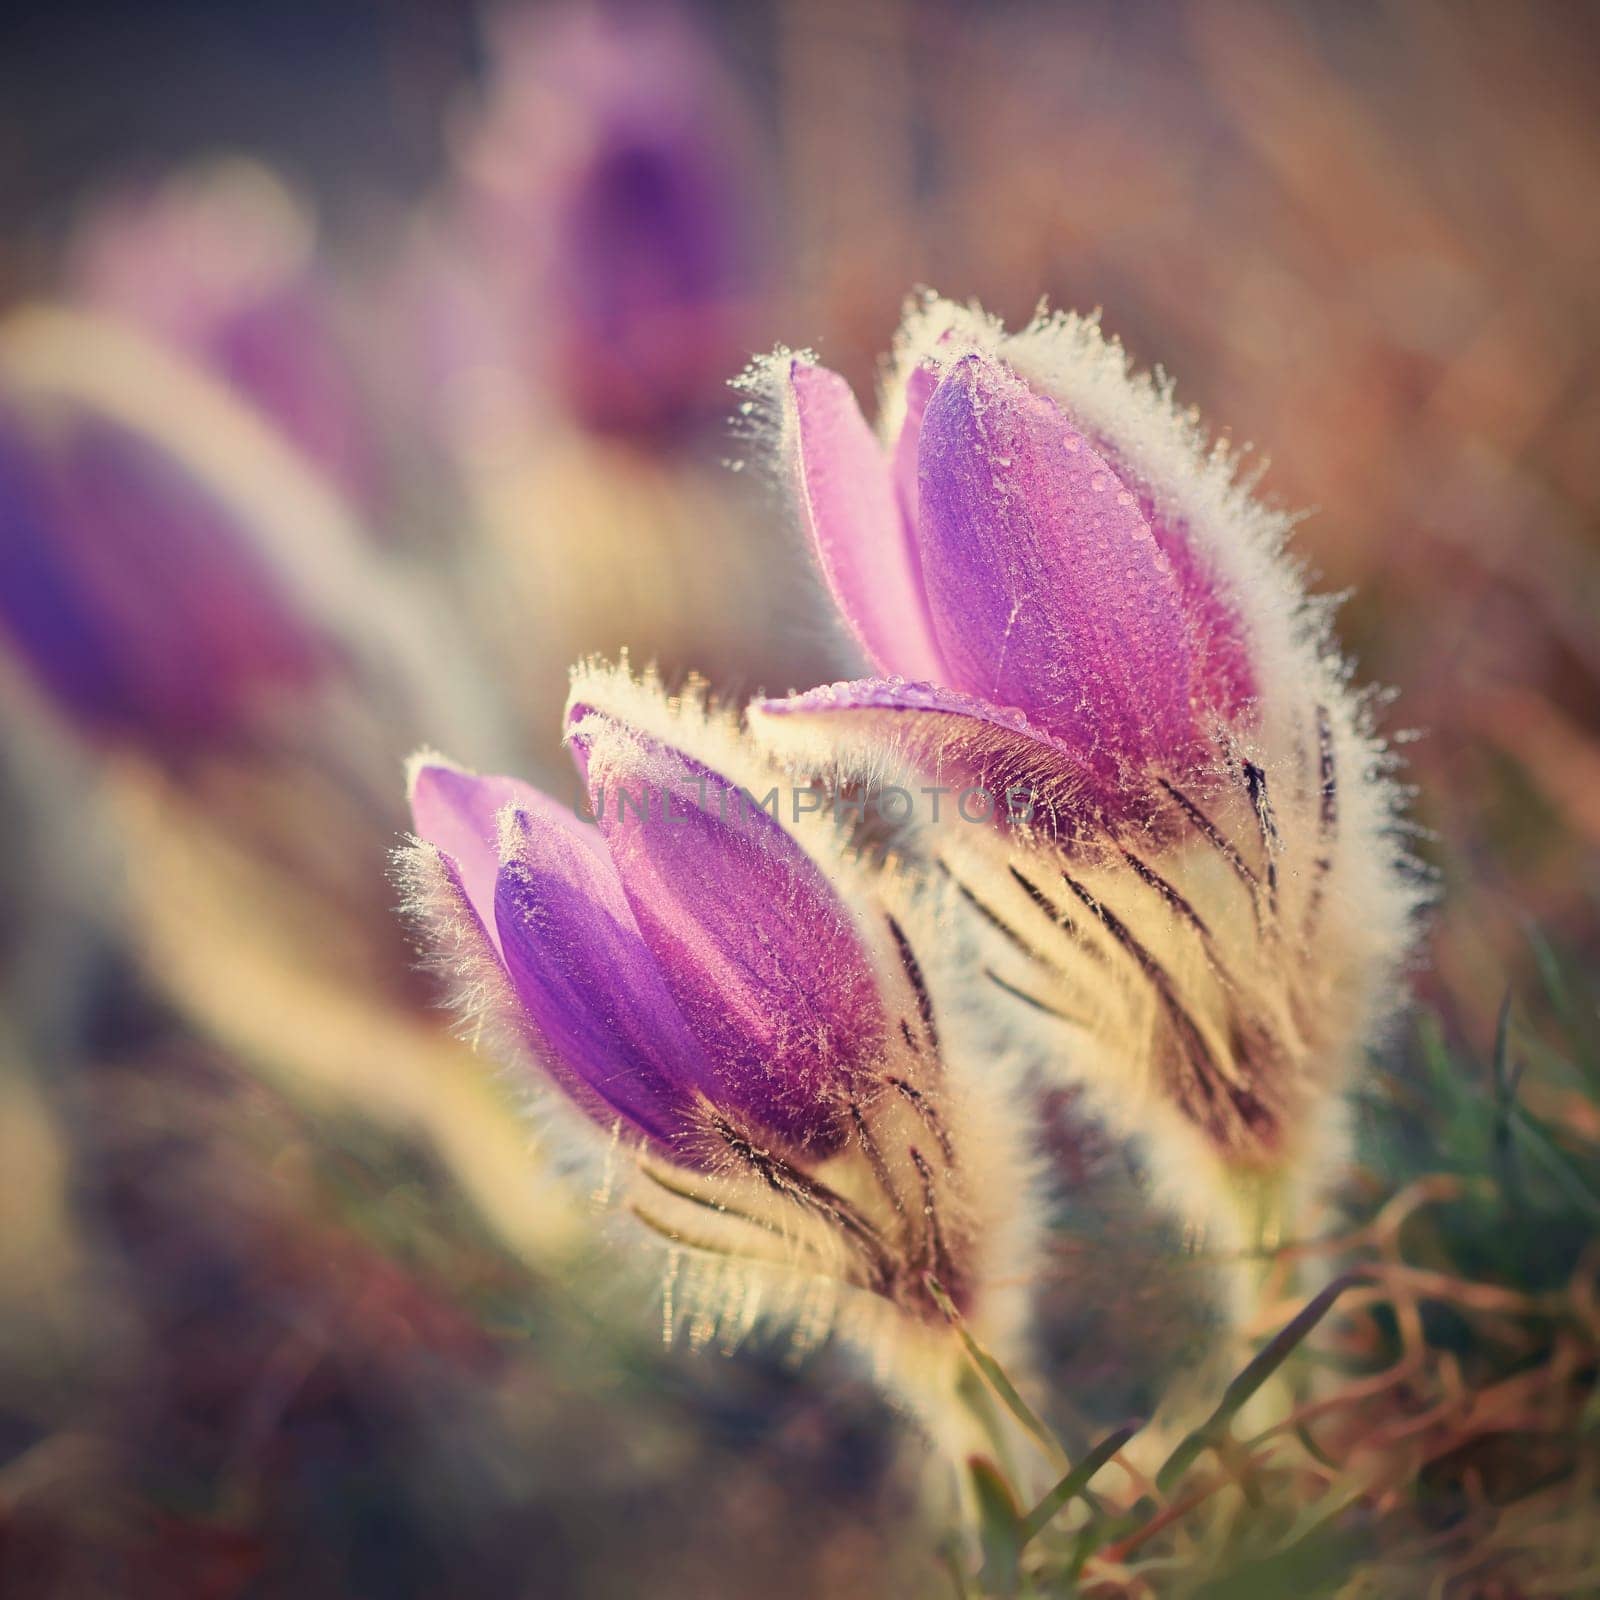 Spring background with flowers in meadow. Pasque Flower (Pulsatilla grandis)